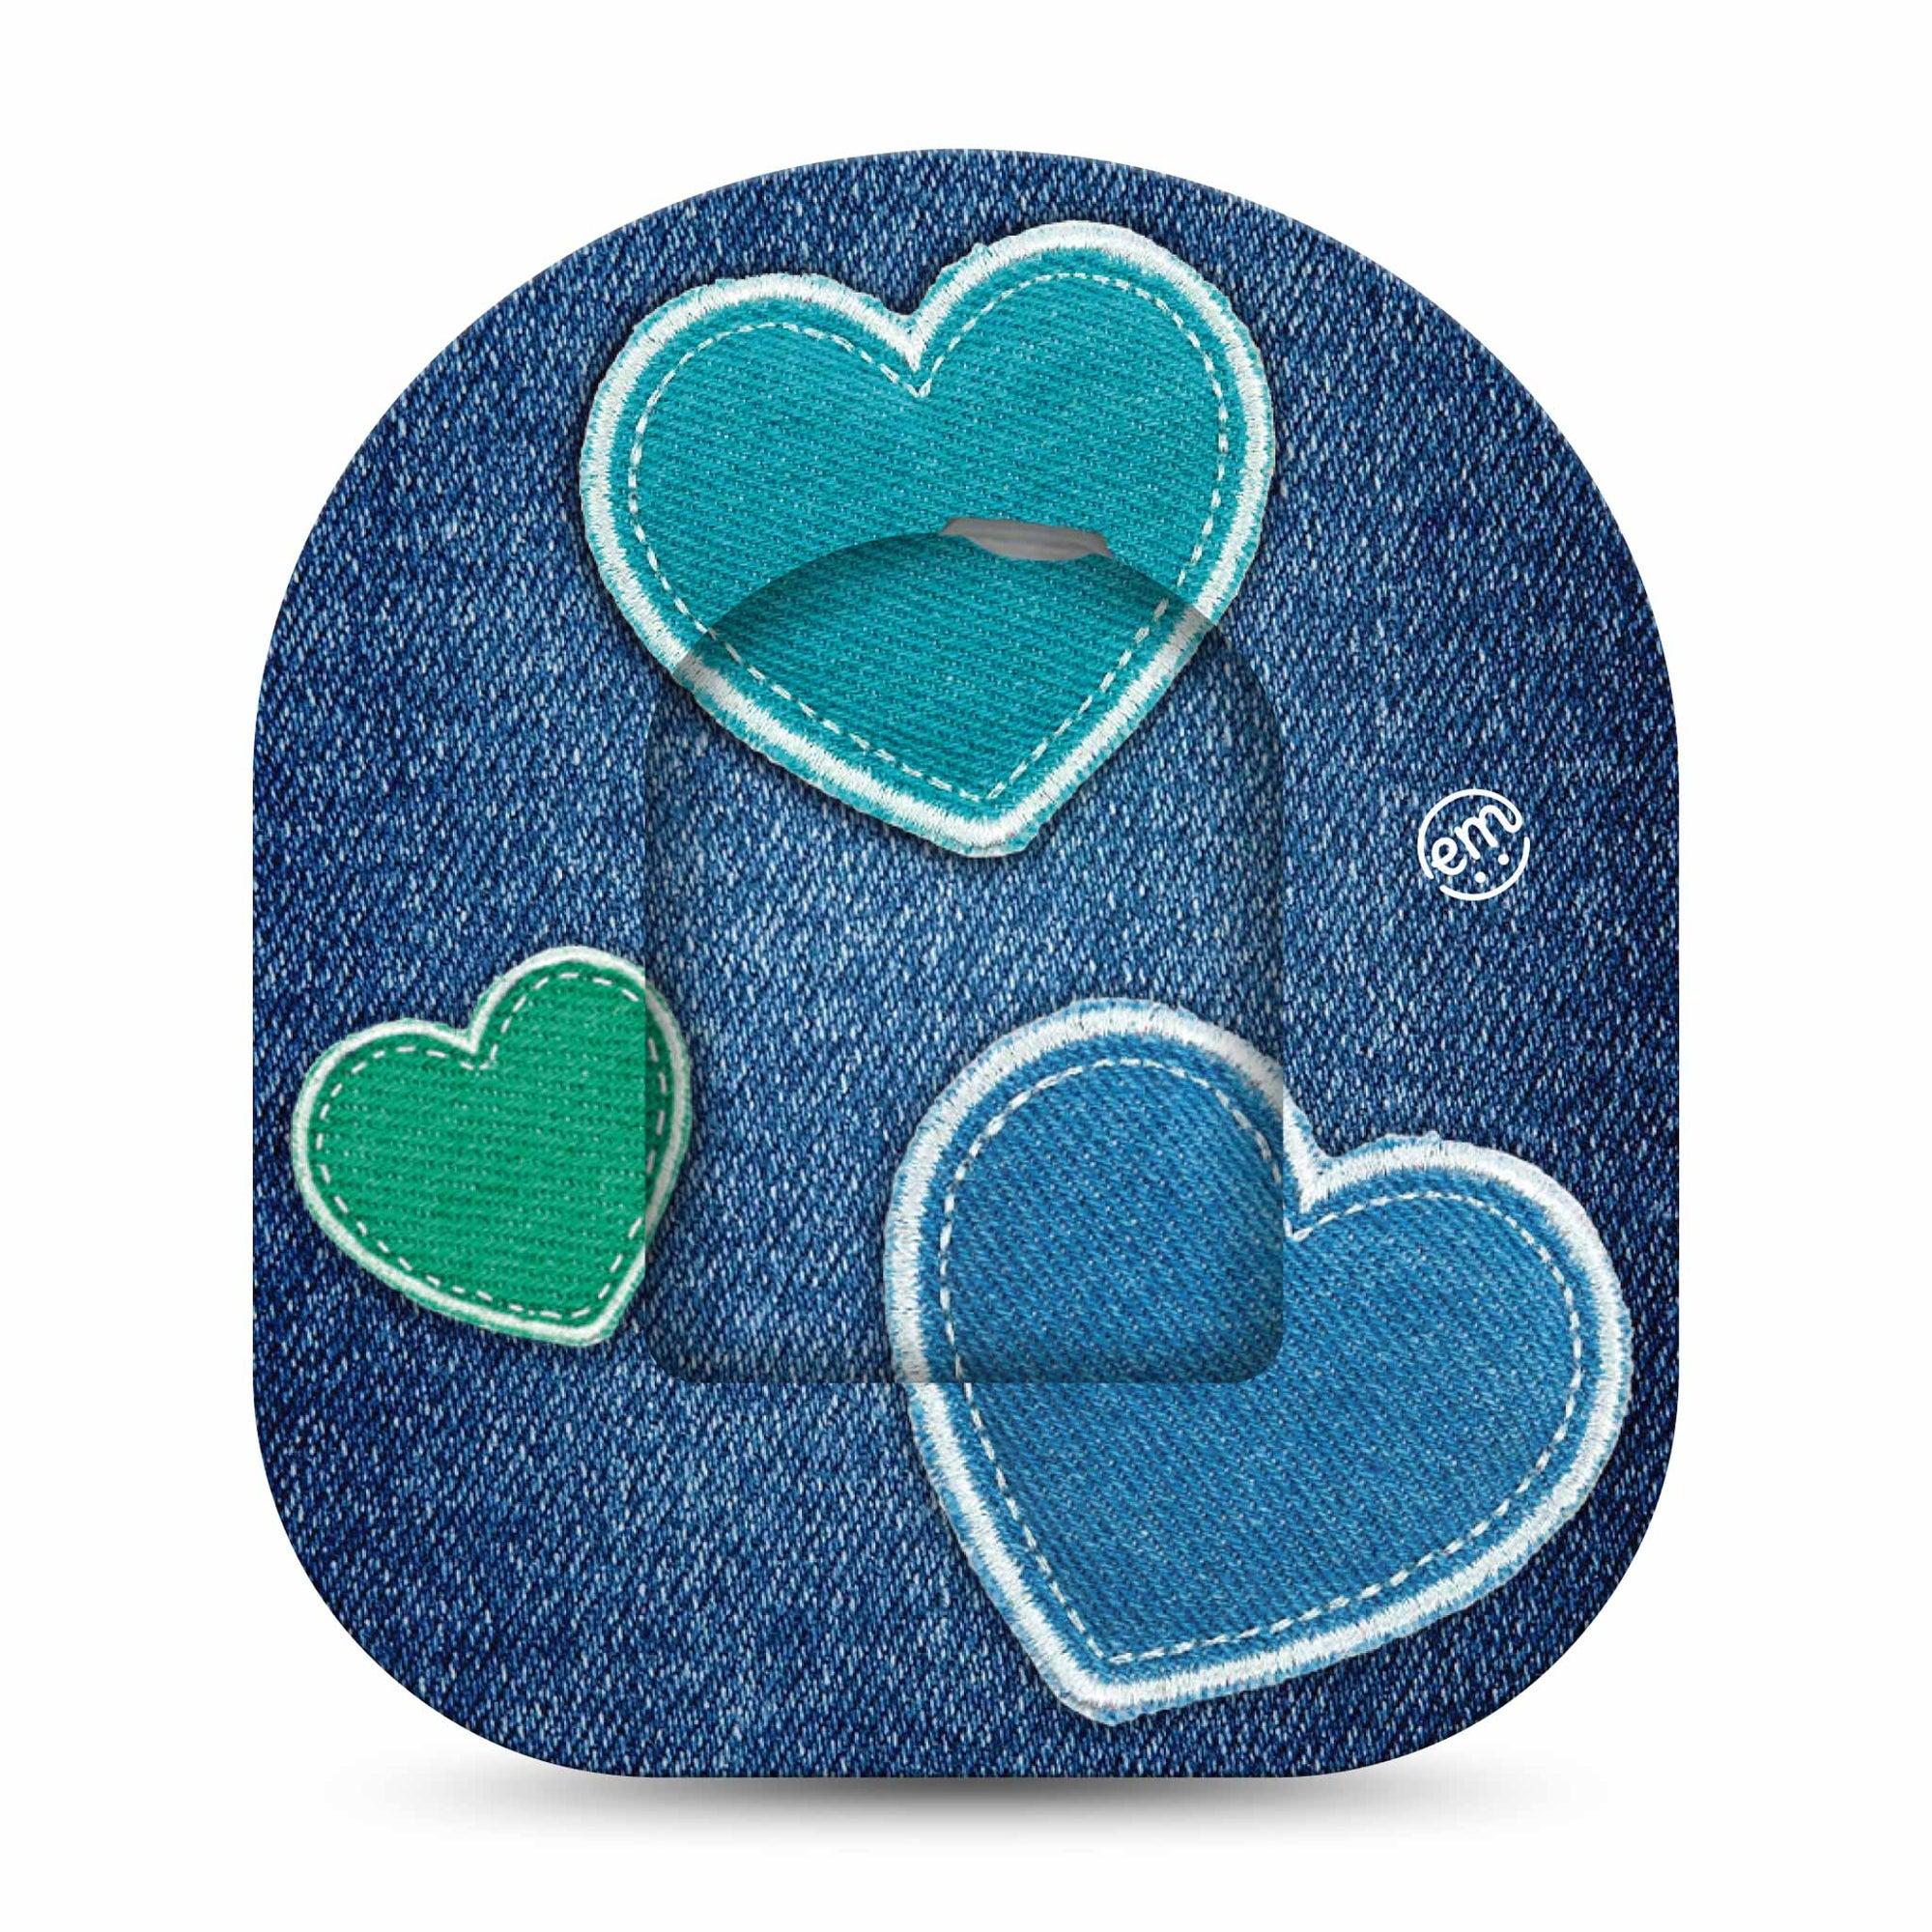 ExpressionMed Denim Heart Omnipod Center Sticker and matching adhesive patch Blue heart patches denim texture inspired Vinyl Pump Design